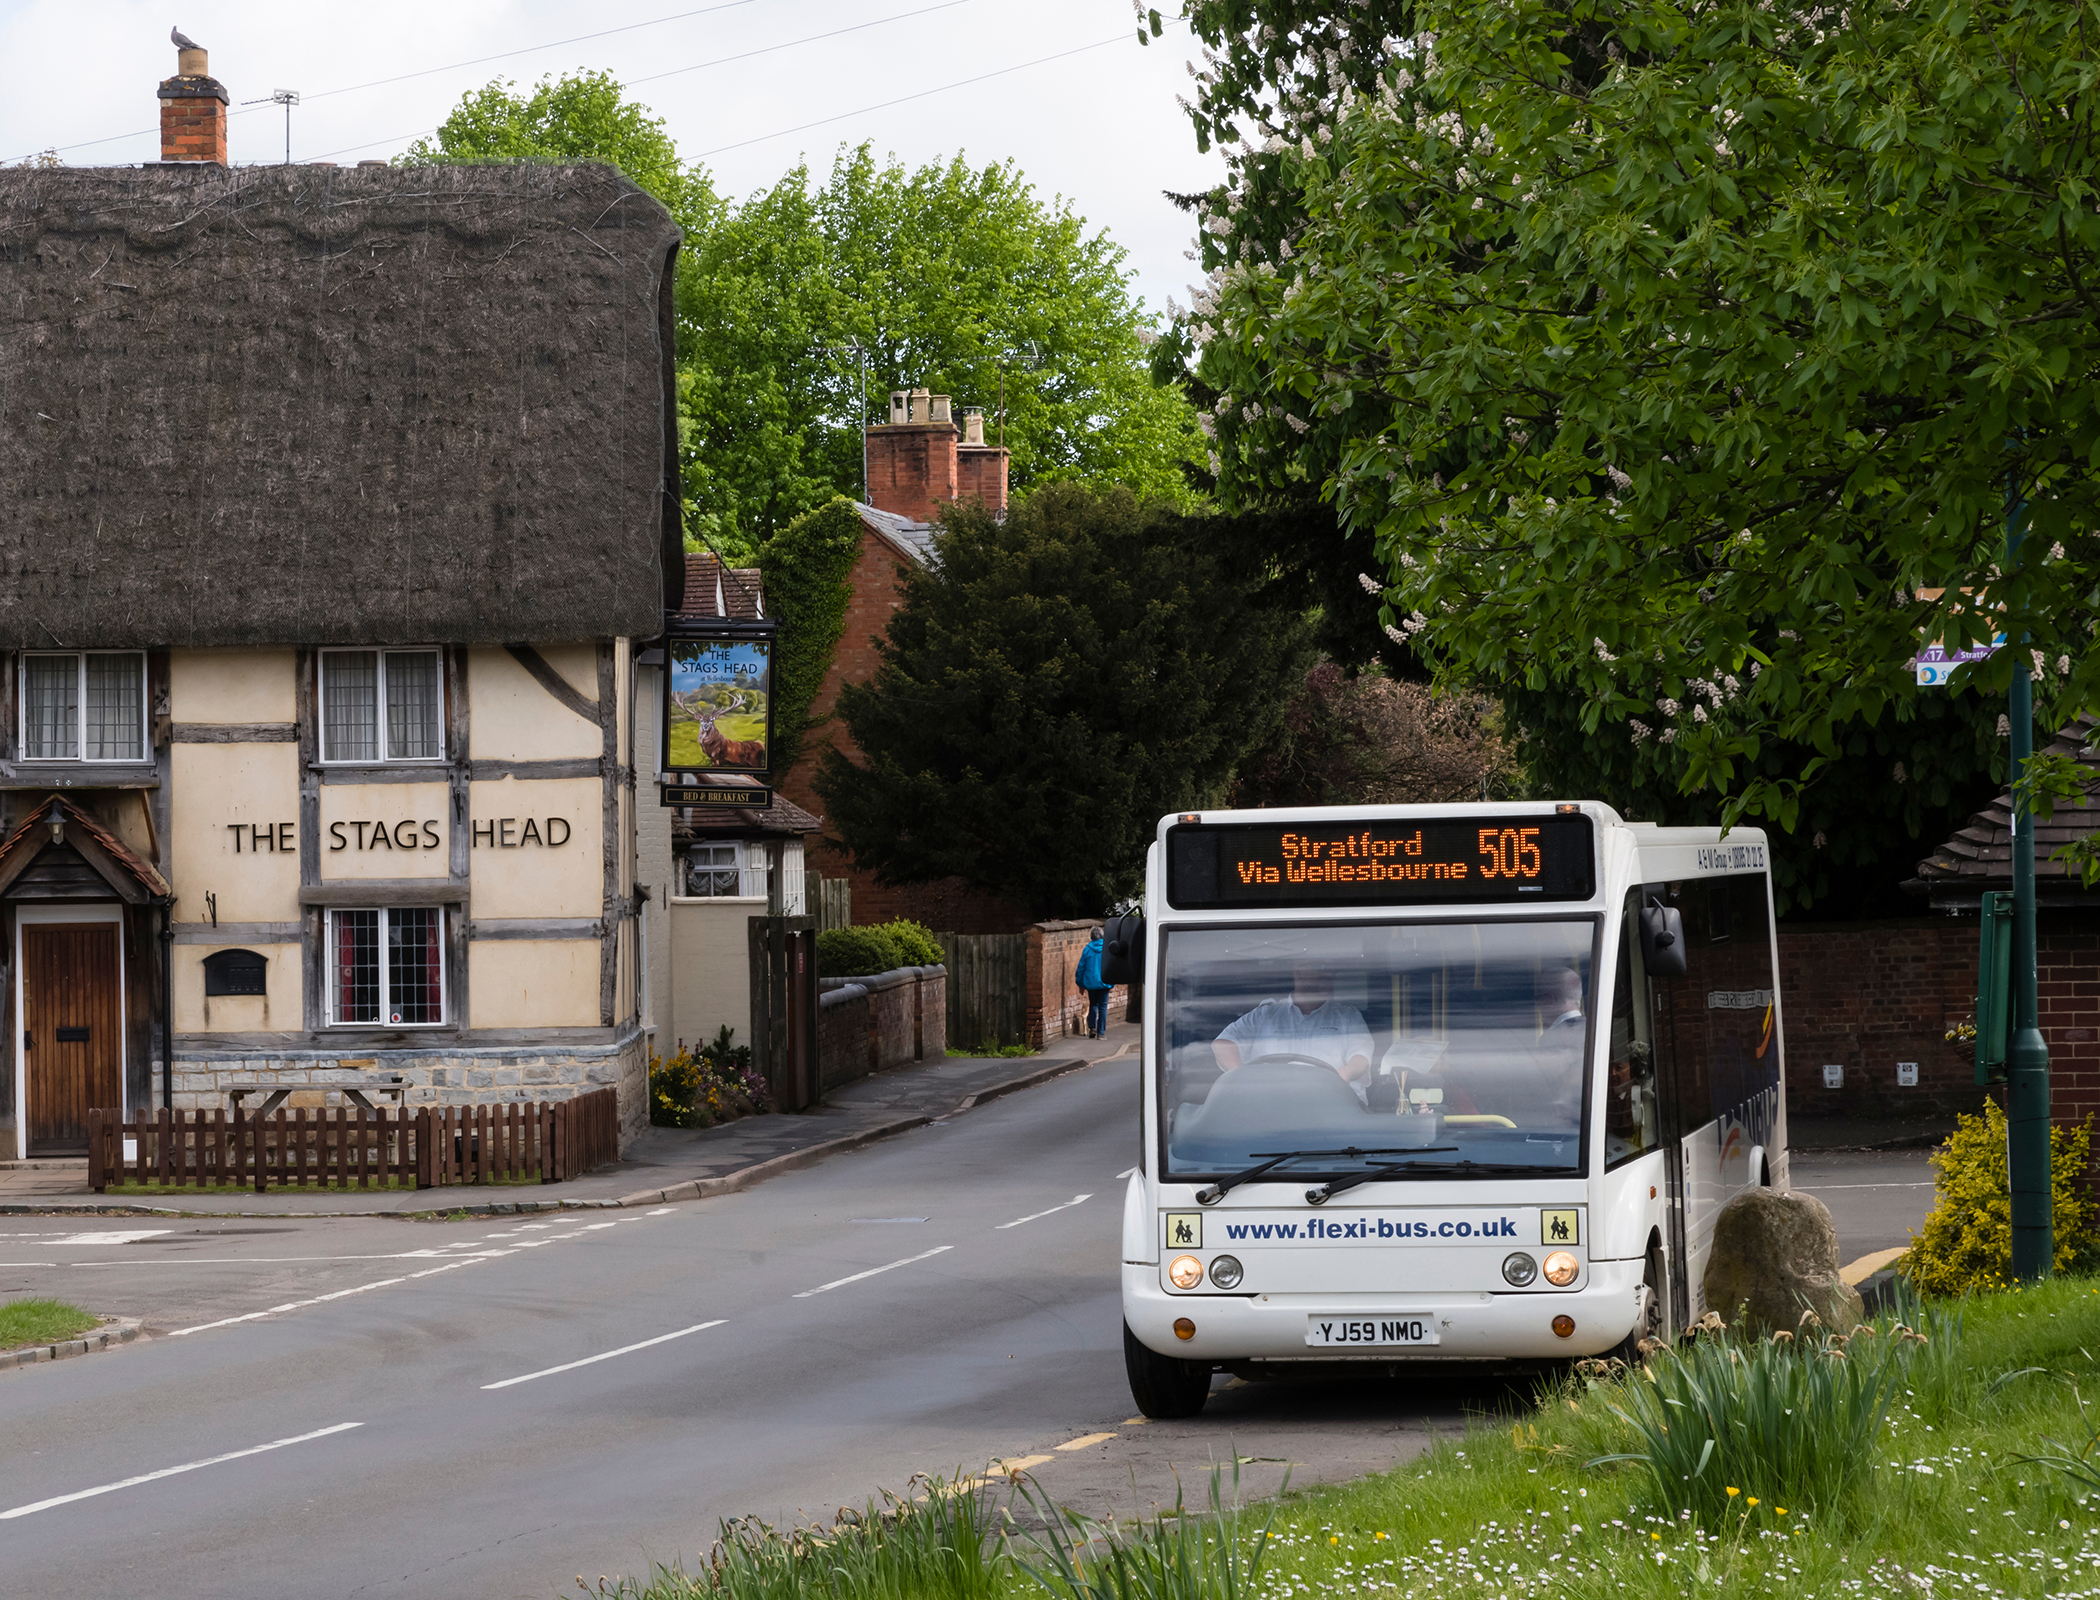 Rural bus services continue to decline as urban routes scoop up central funding